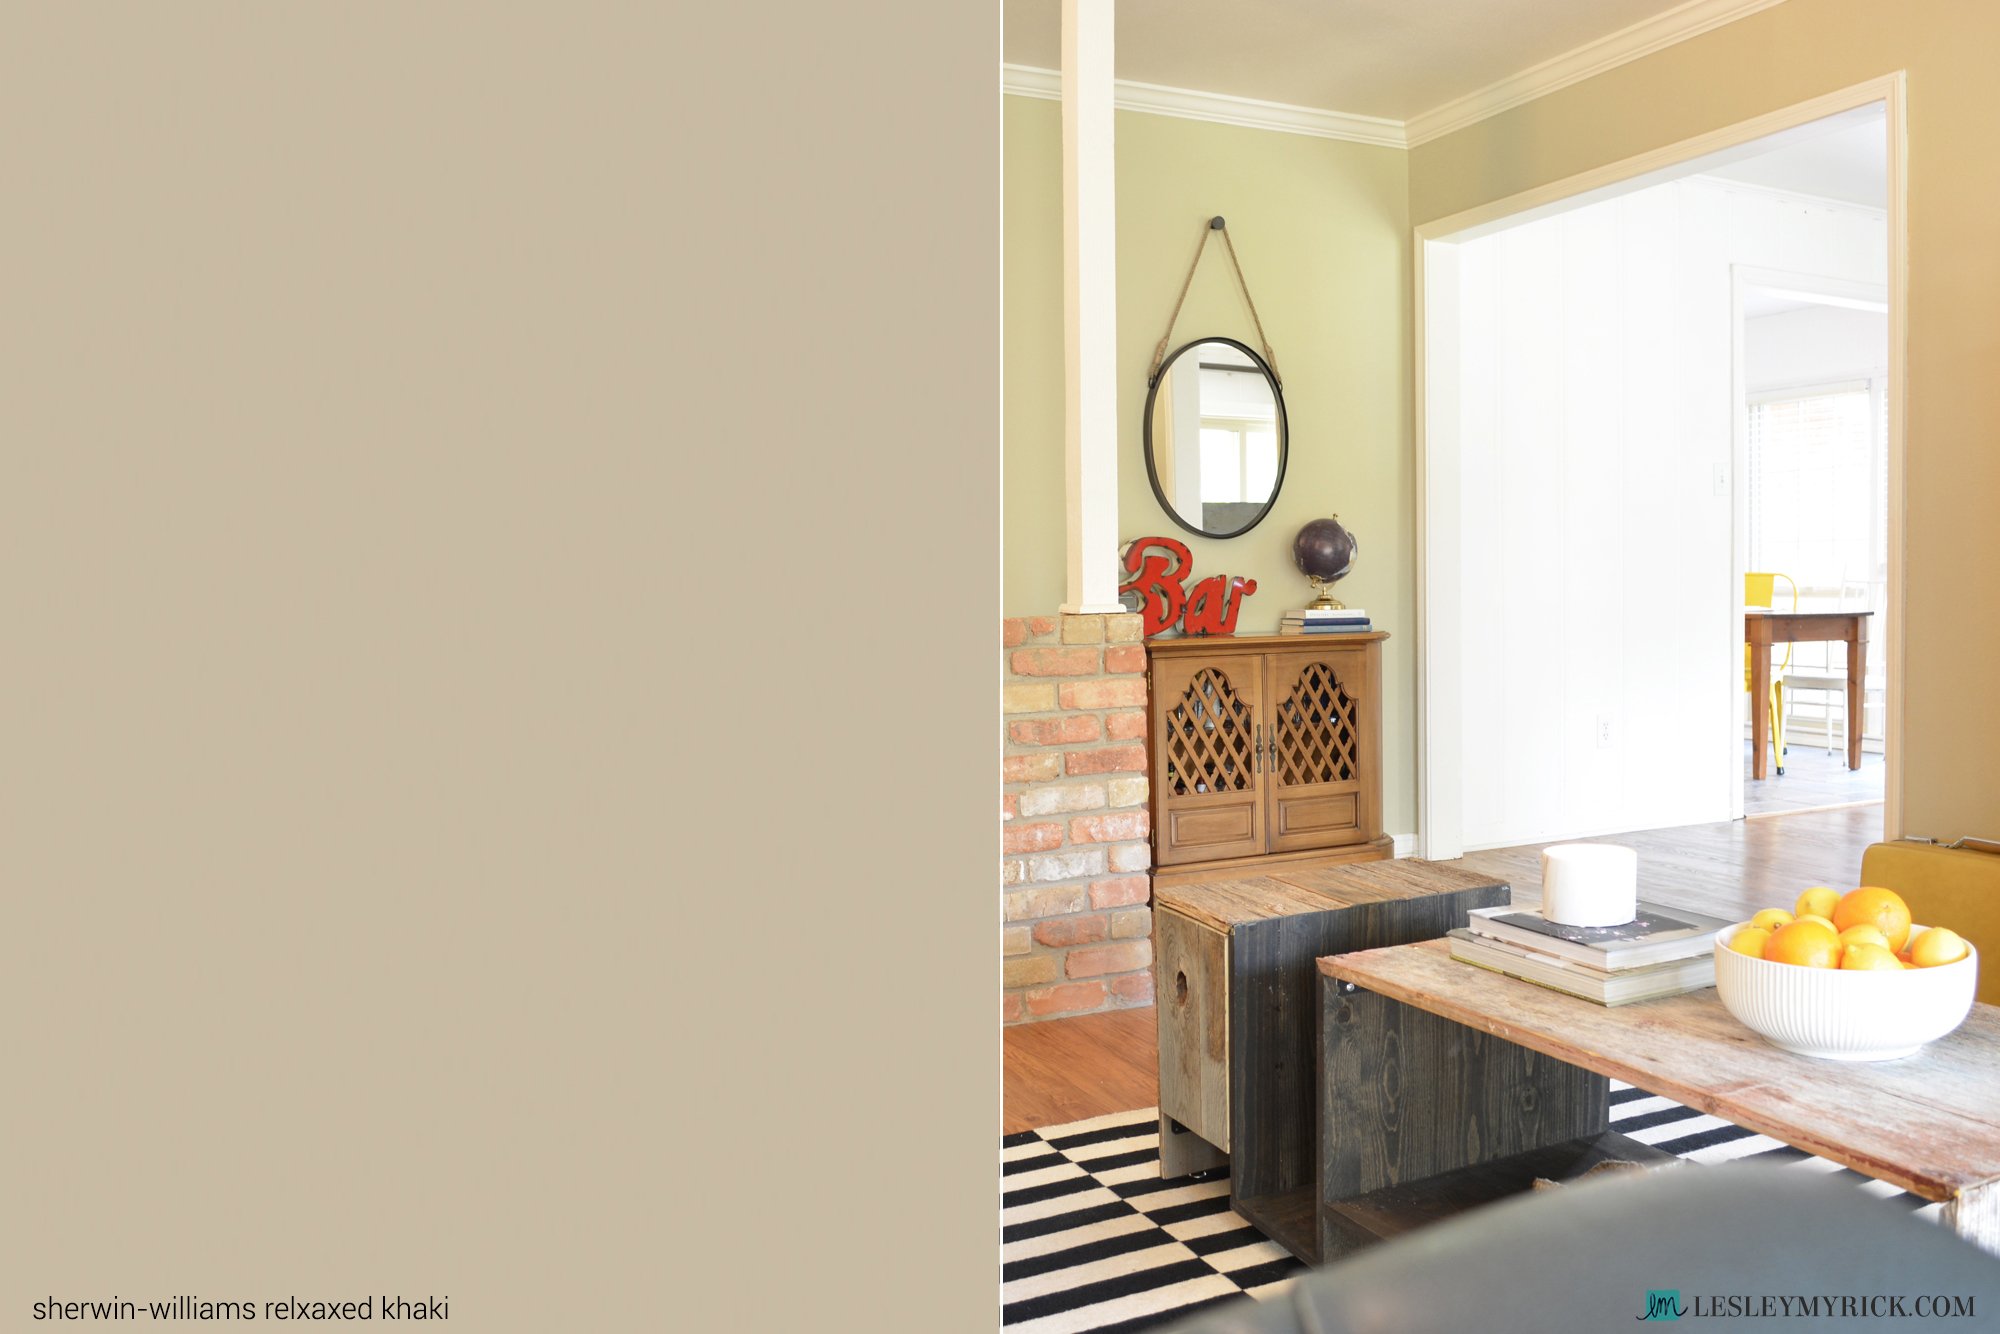 Best neutral paint color: Sherwin-Williams Relaxed Khaki